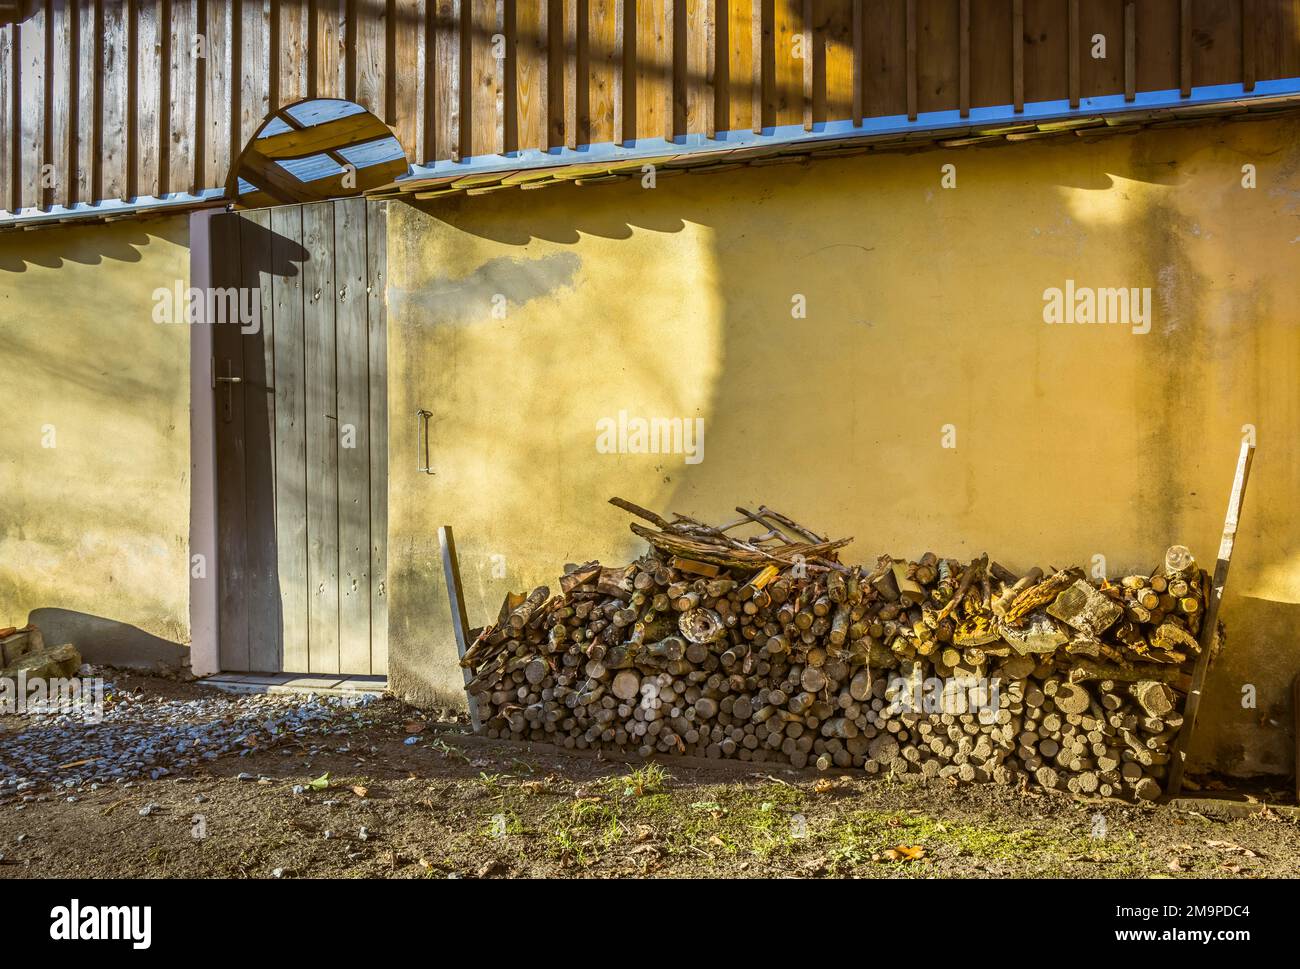 A pile of stacked firewood, prepared for heating the house, harvested for heating in winter on the house wall Stock Photo